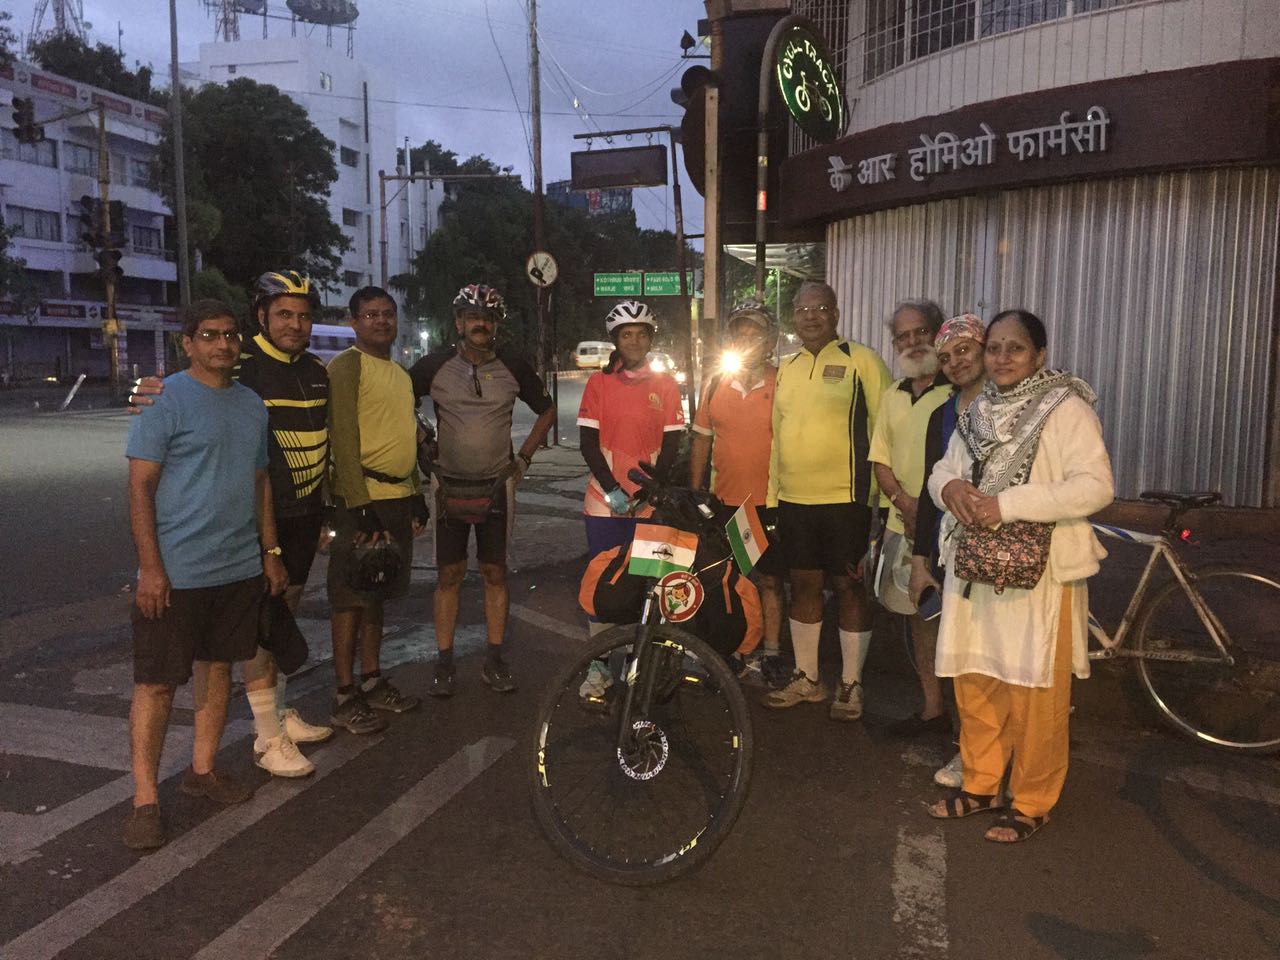 Kick off from Pune with Senior Citizen Cycling Group